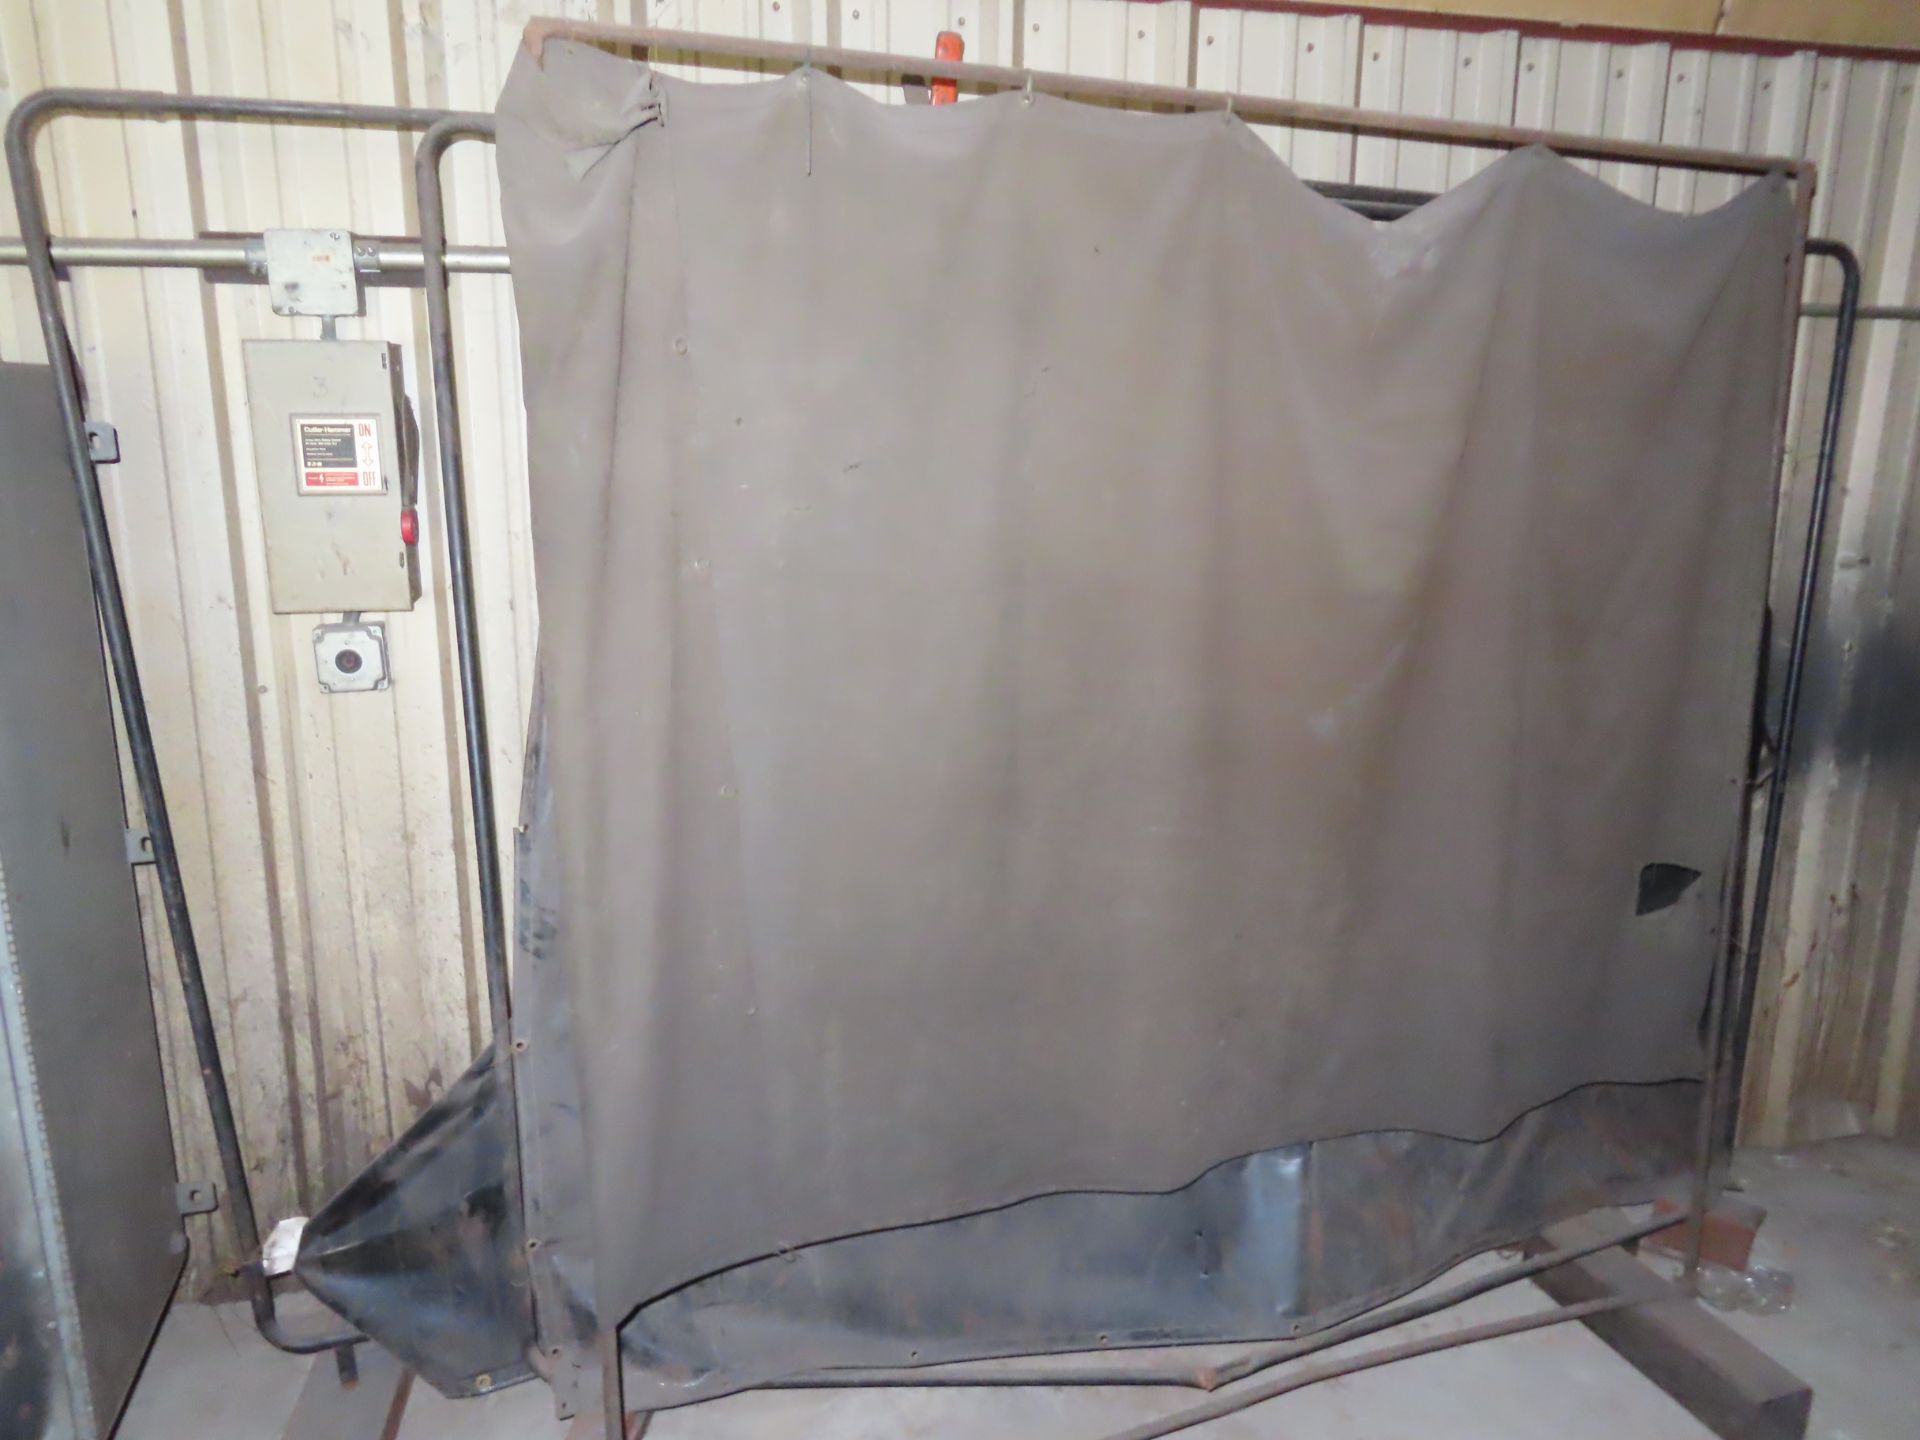 LOT METAL CABINET, SHOP CARTS, WELD CURTAINS, ETC.BLDG: 5 - LOT METAL CABINET, SHOP CARTS, WELD CURT - Image 2 of 2